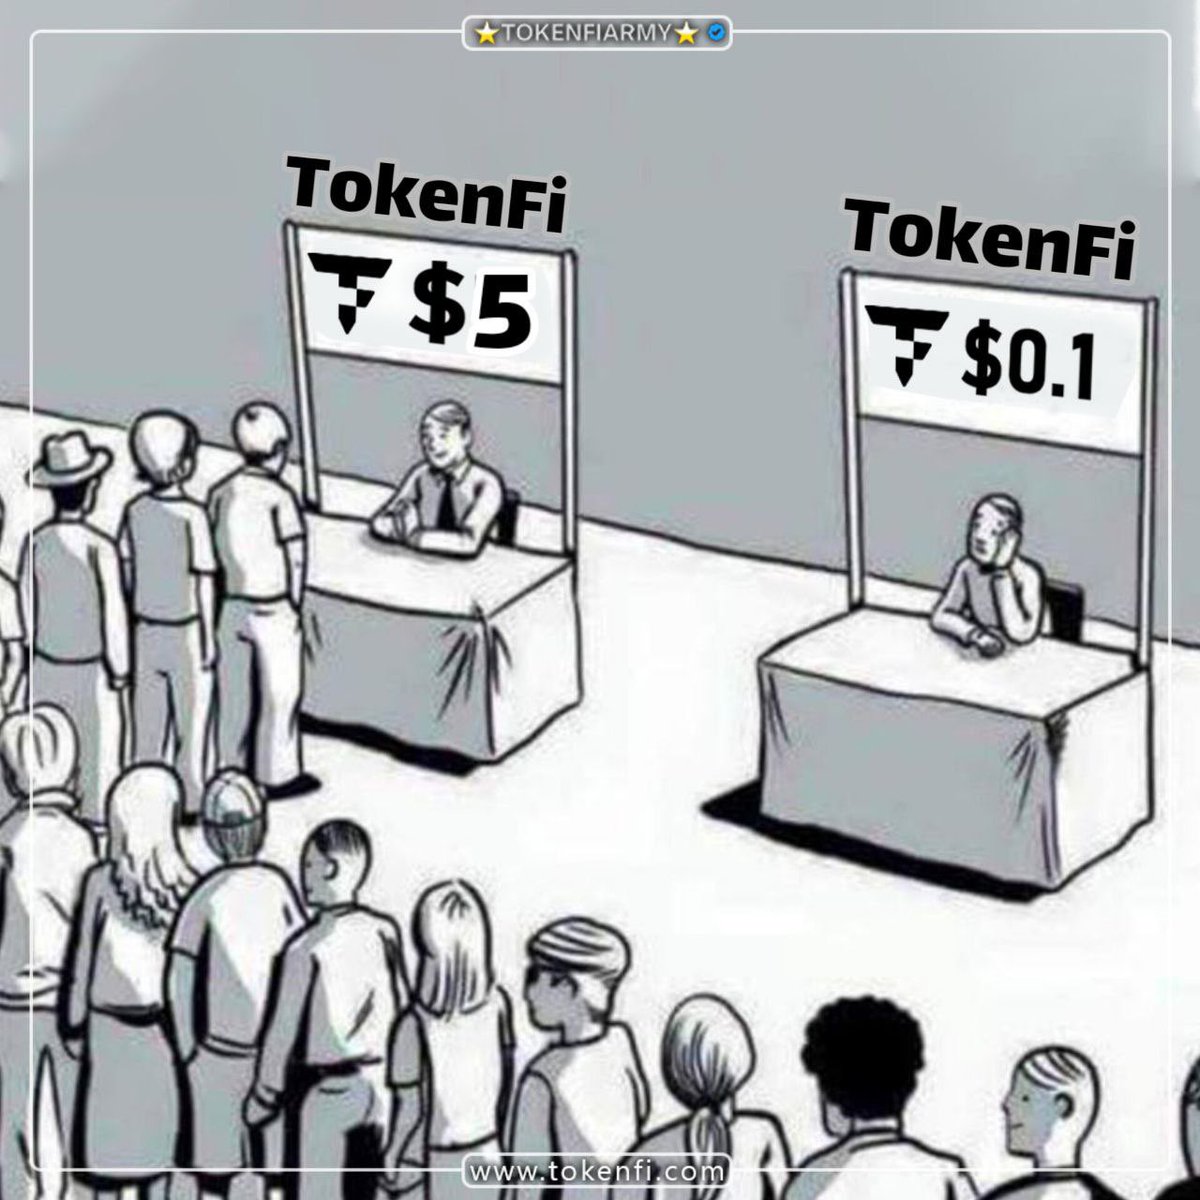 Is always like that. Happened in the past, and will happen again in 2024. #TOKENFI